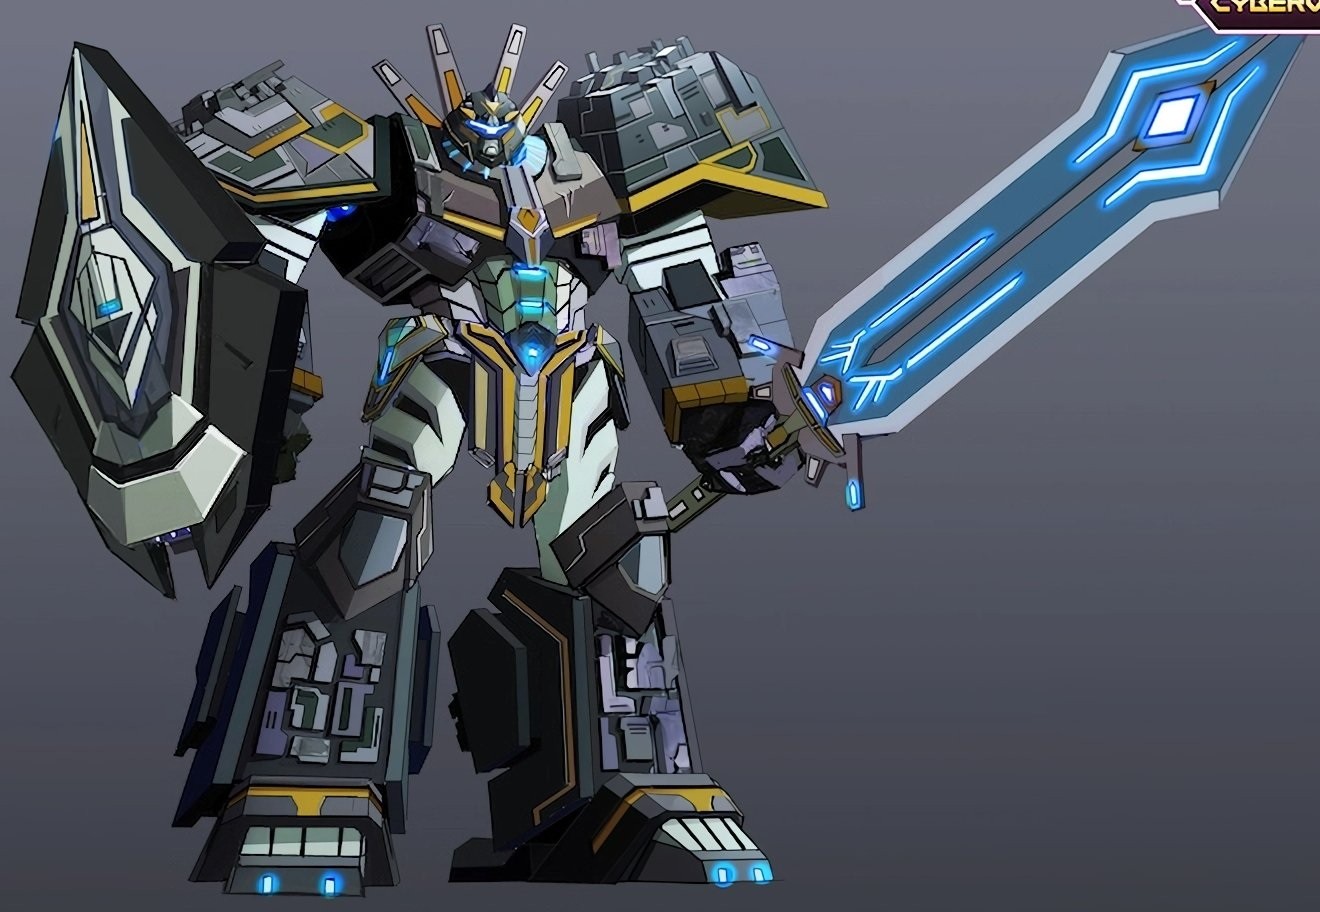 Product Details for Upcoming Transformers Cyberverse Ultimate Class Iaconus